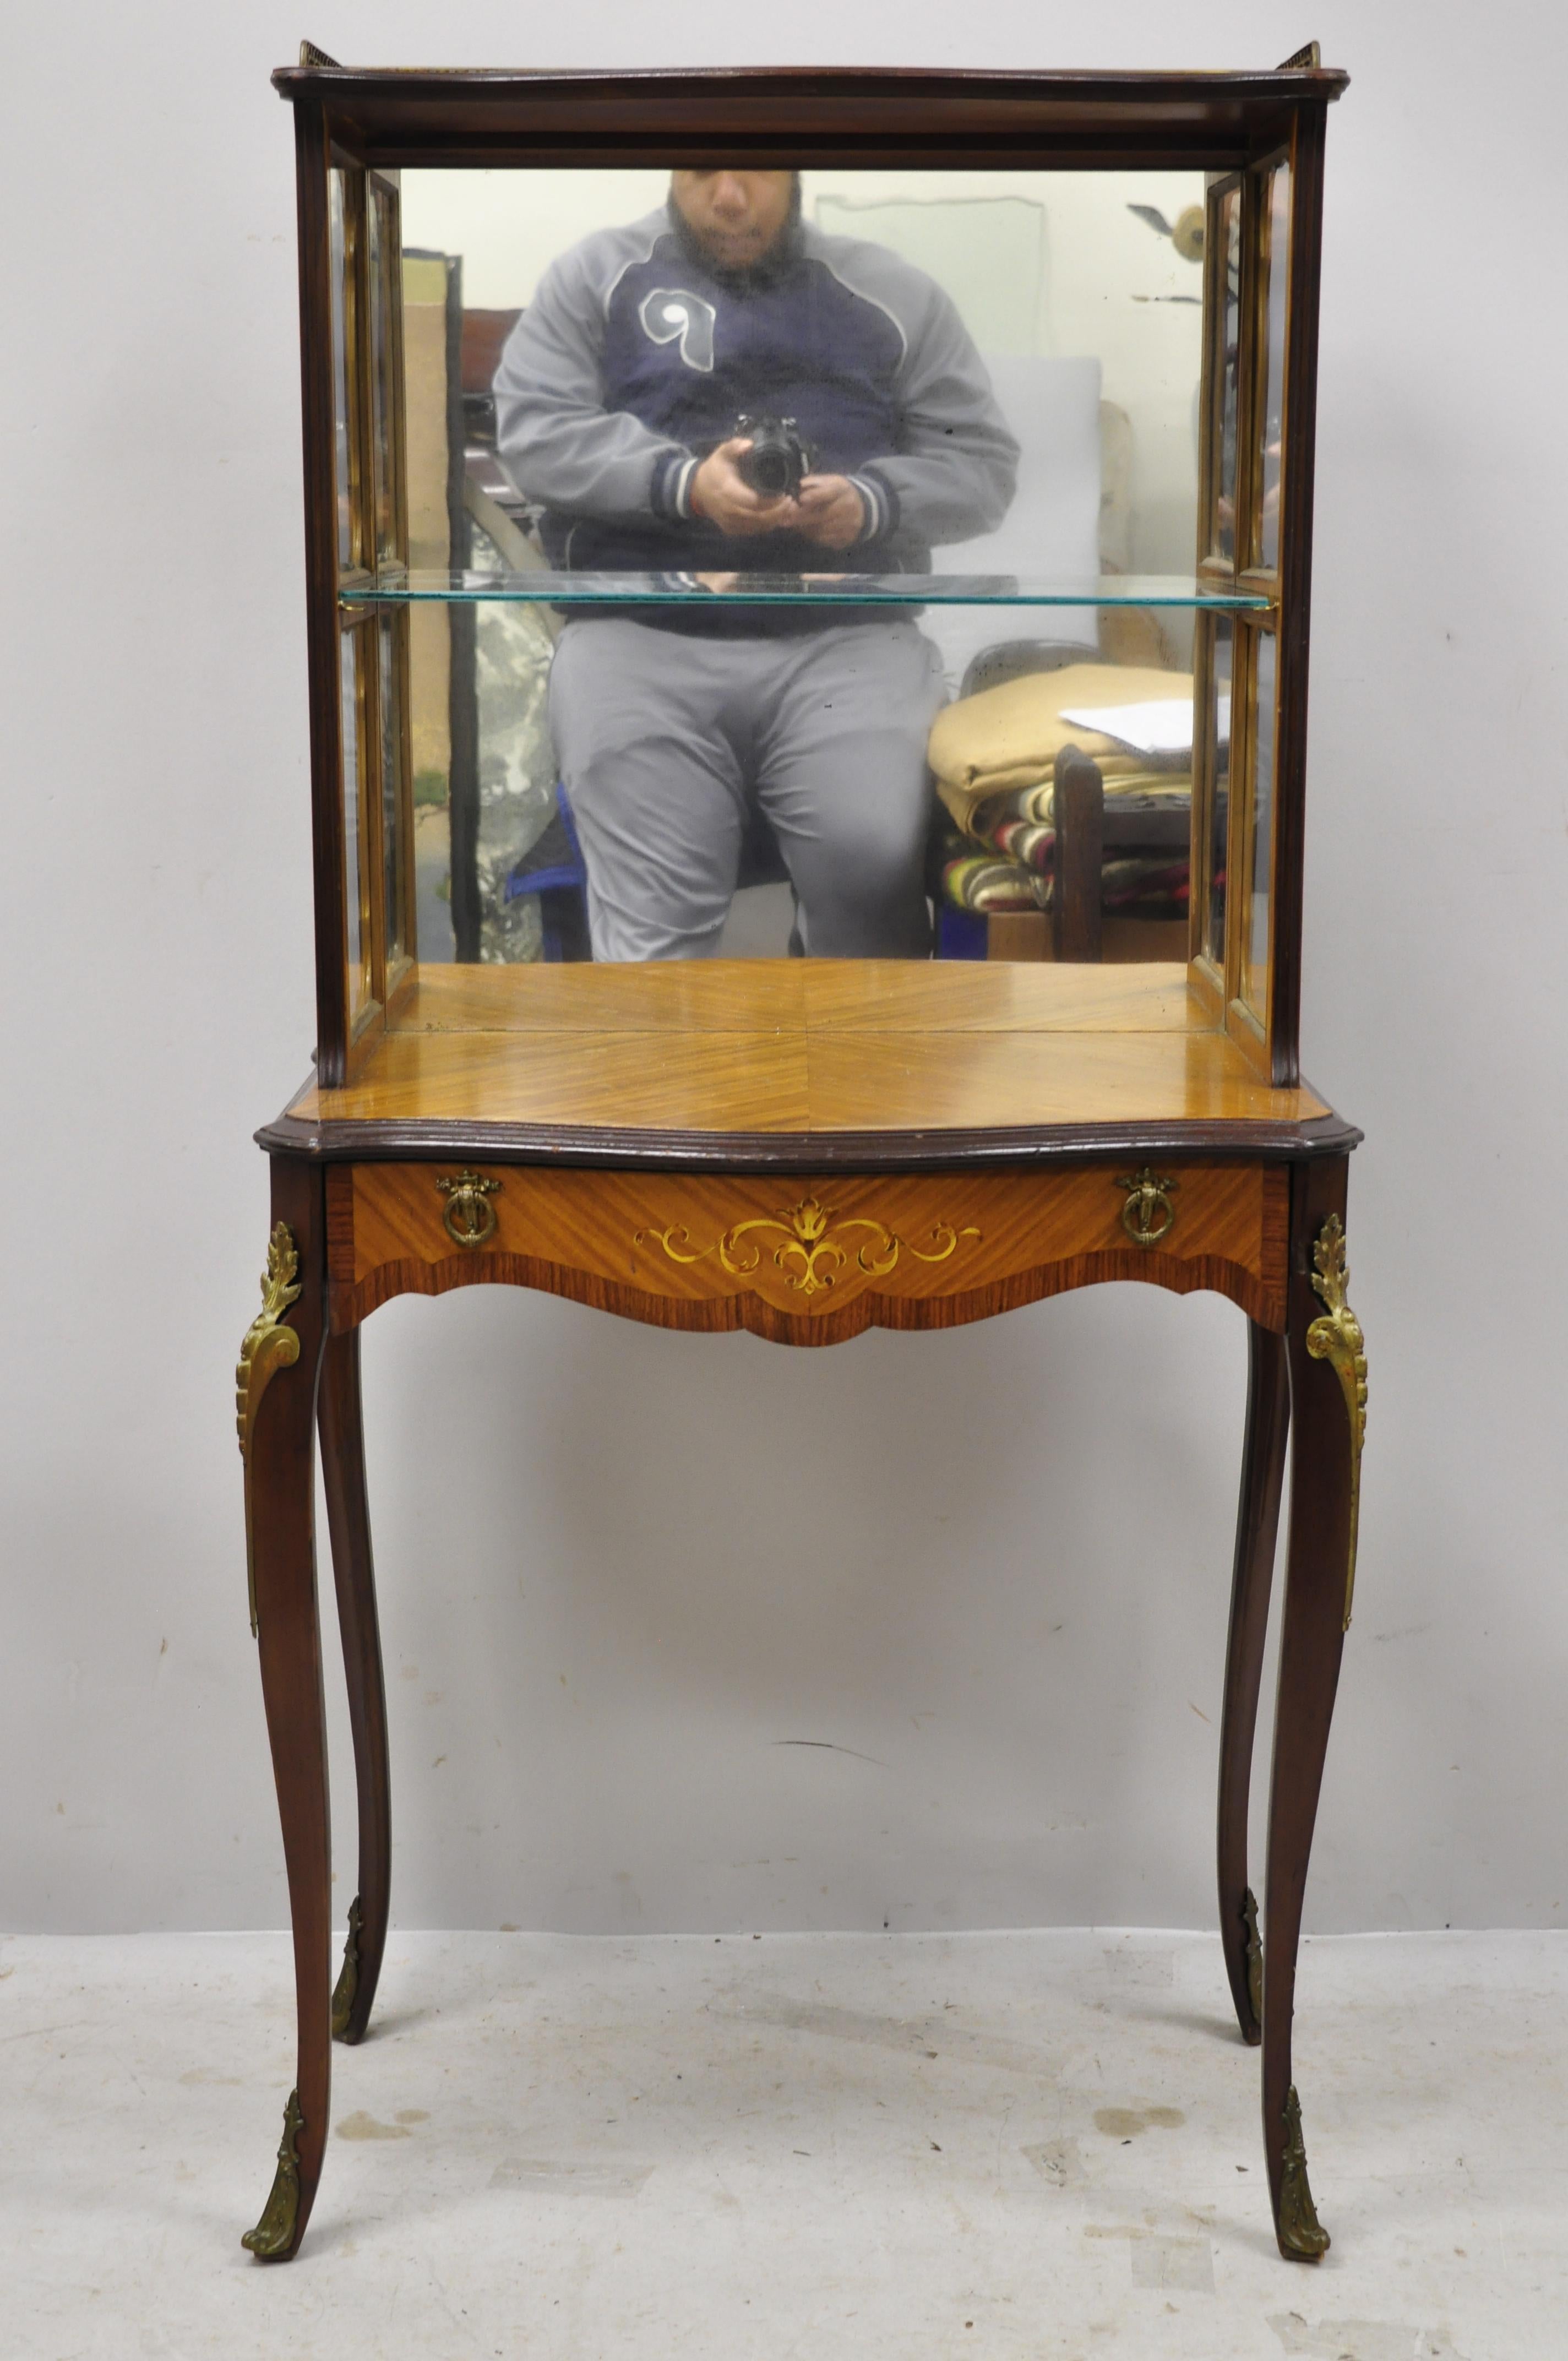 Antique French Louis XV small Petite Curio étagère stand with satinwood inlay and one-drawer. Item features a mirror back, bronze ormolu, satinwood inlay, nice petite size, small impressive form, 1-drawer, 1 glass shelf, cabriole legs, tapered legs,